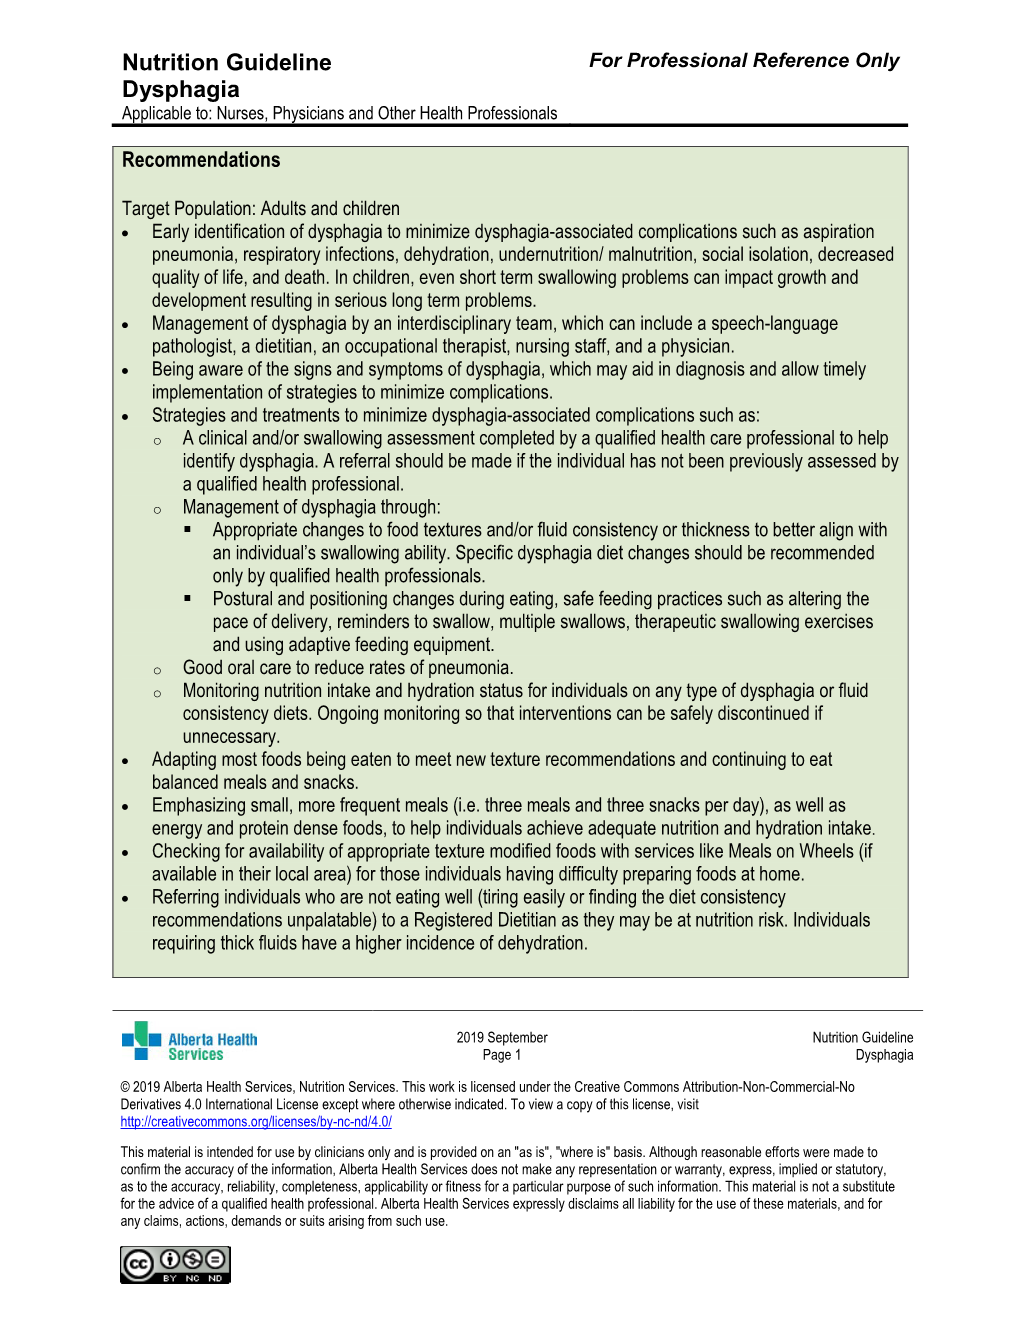 Dysphagia Nutrition Guideline